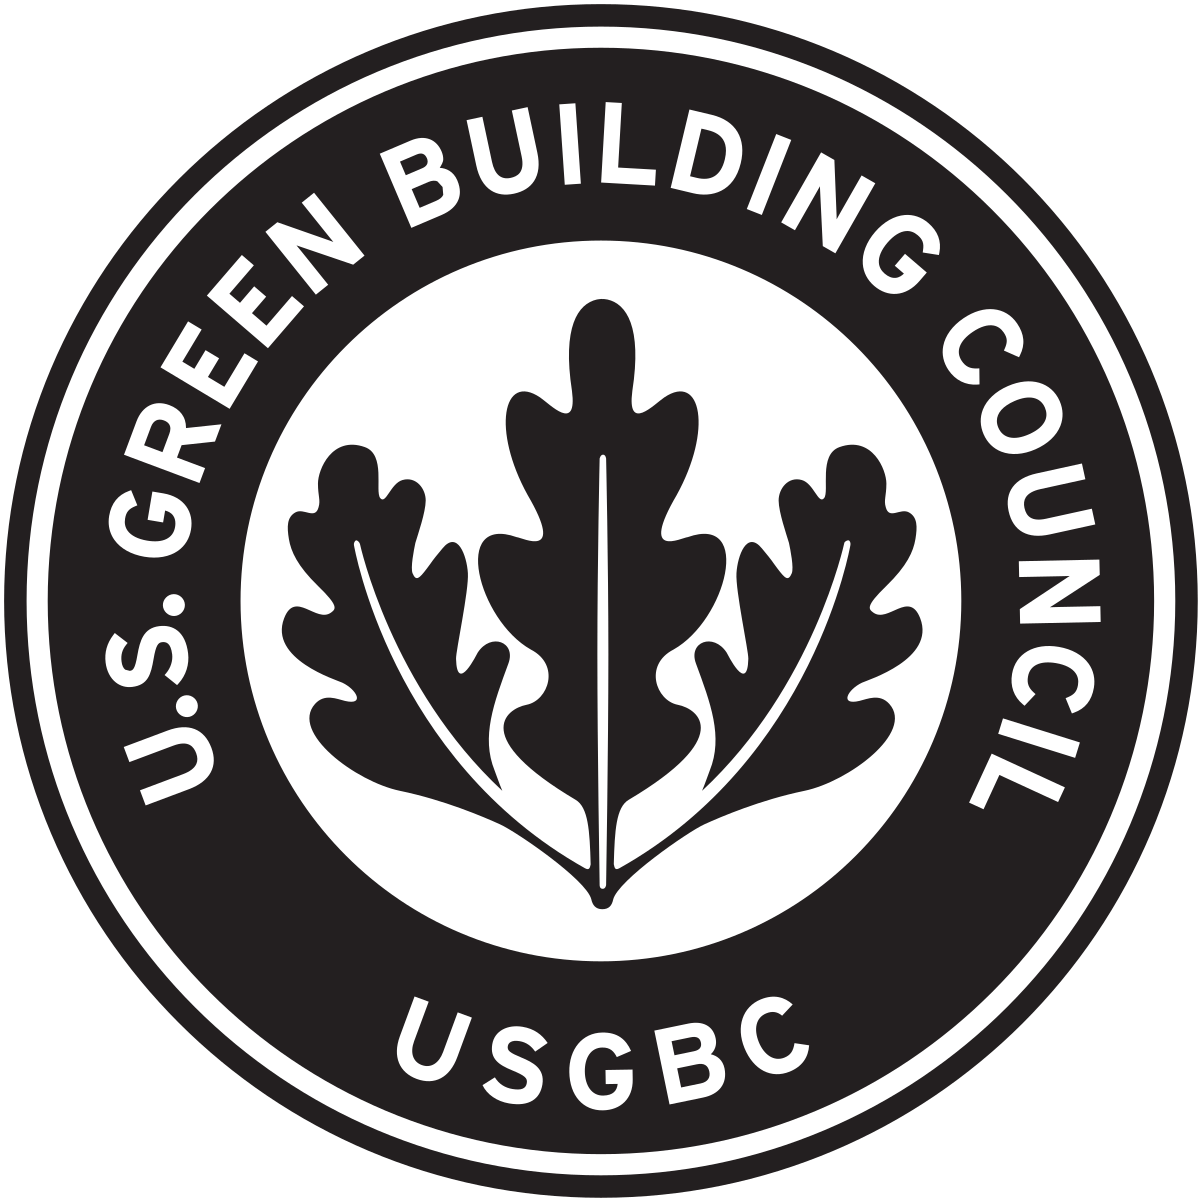 Pliteq is a member of USGBC - US Green Building Council